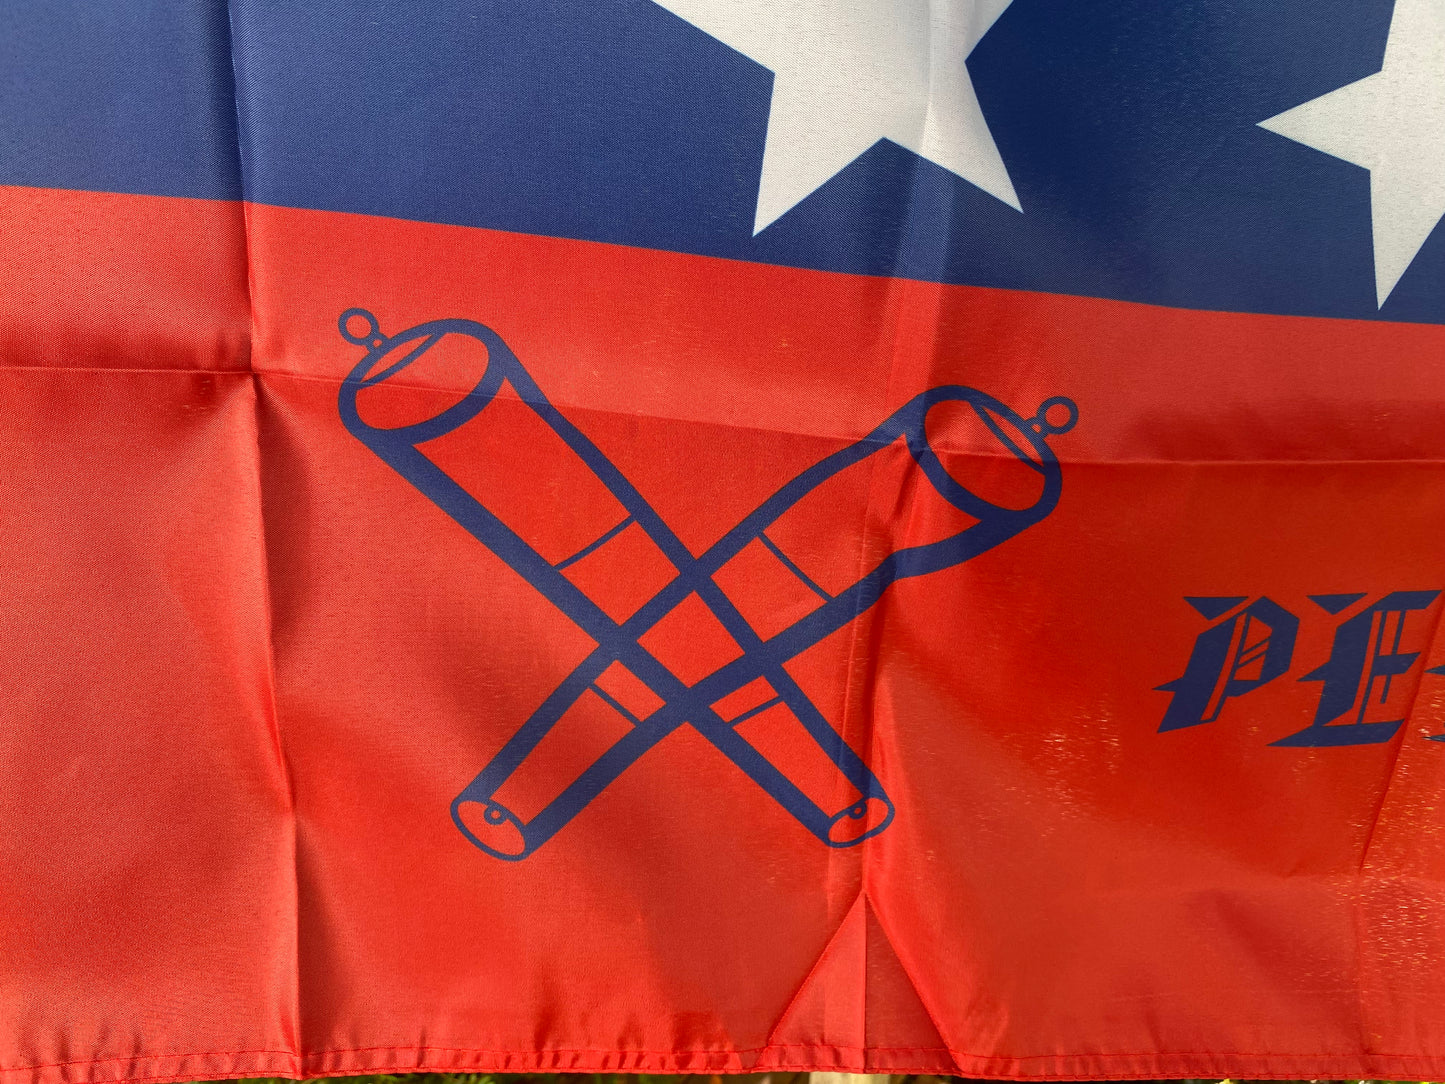 "Patience, Courage, Victory" 8th Tennessee Infantry 1st National House Flag